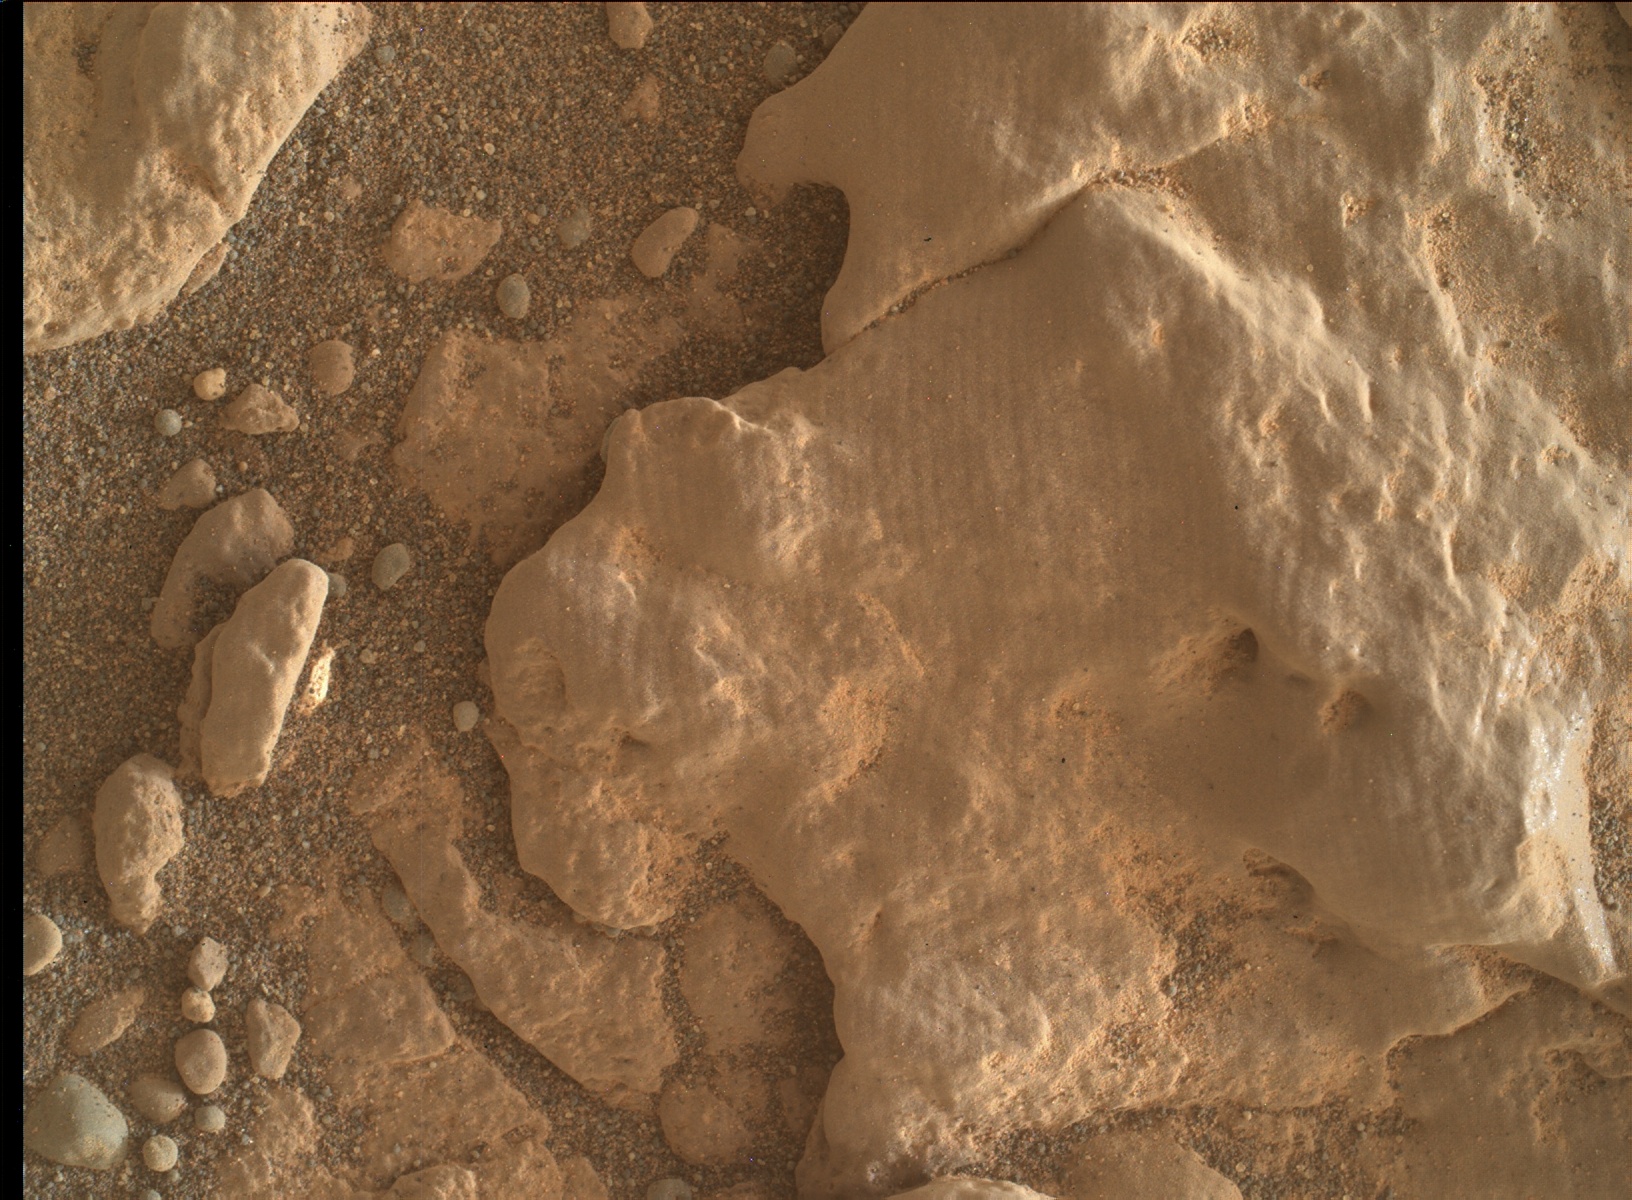 Nasa's Mars rover Curiosity acquired this image using its Mars Hand Lens Imager (MAHLI) on Sol 2819